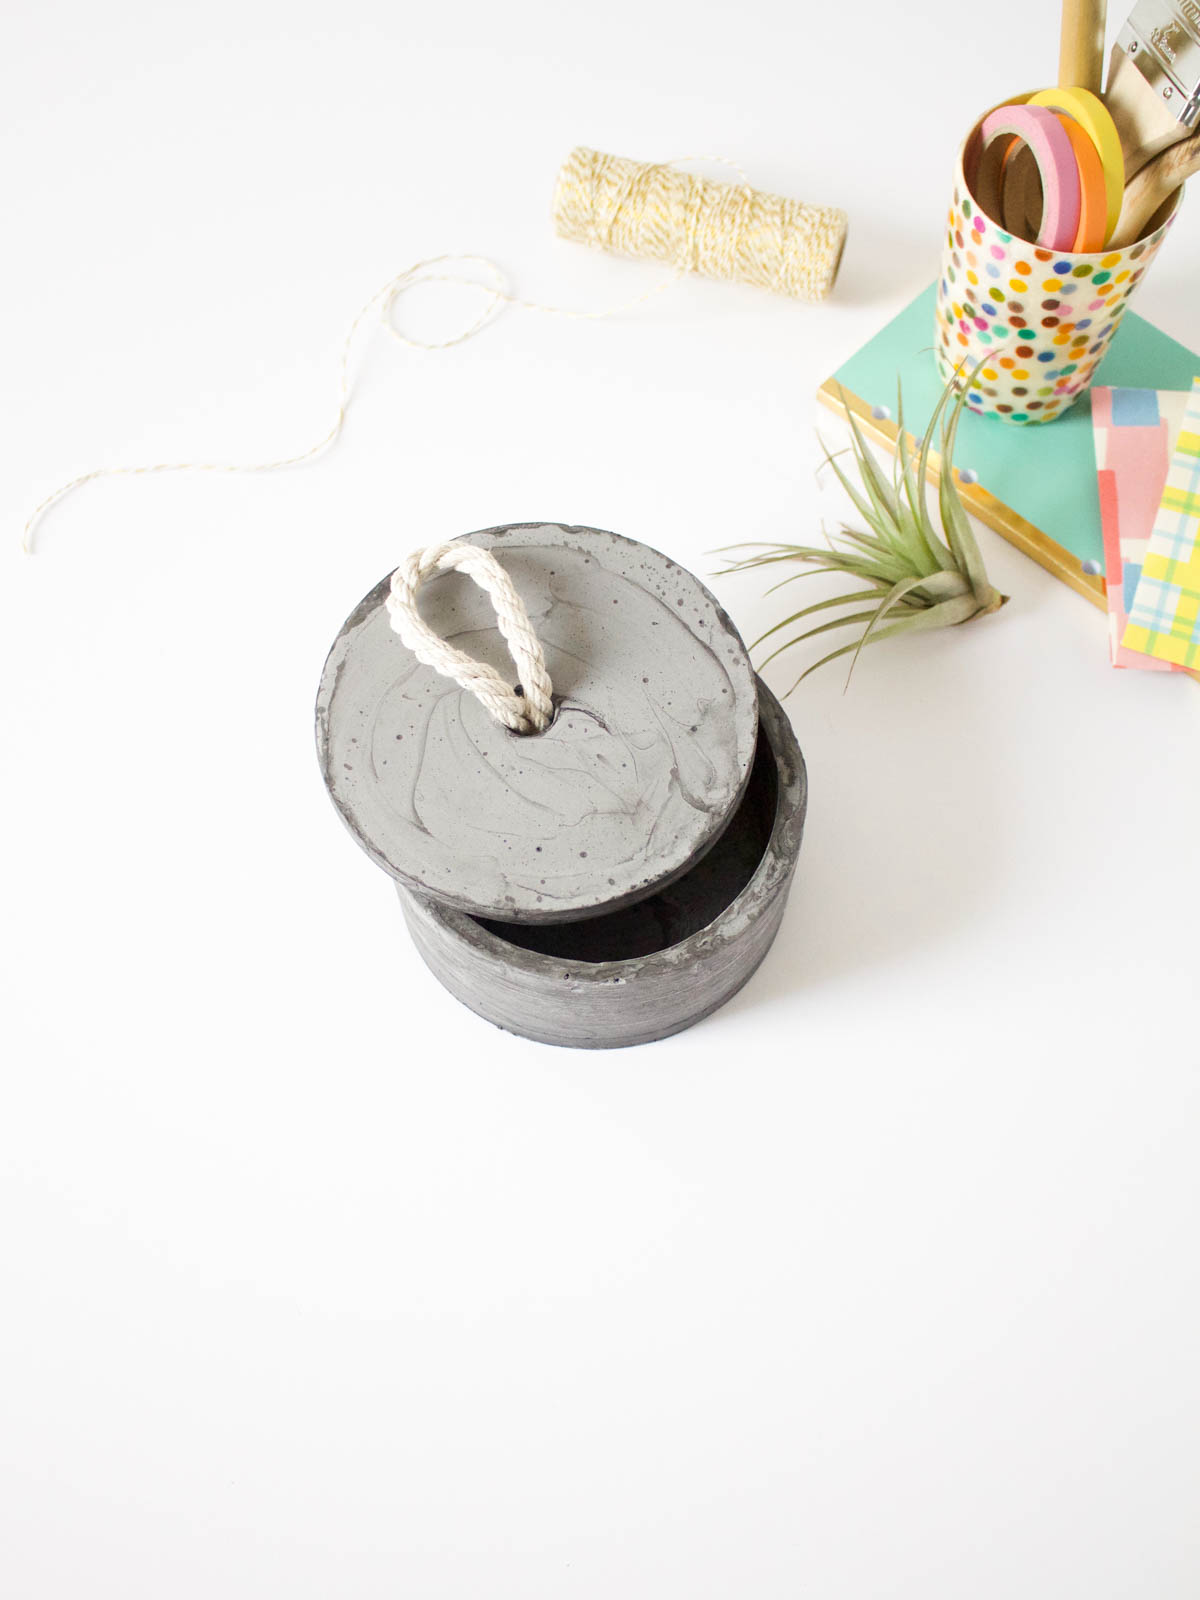 DIY Concrete Bowl and Lid | Fish & Bull - If you too are in need of some modern small storage for your office supplies, keys or jewelry this DIY was made for you!